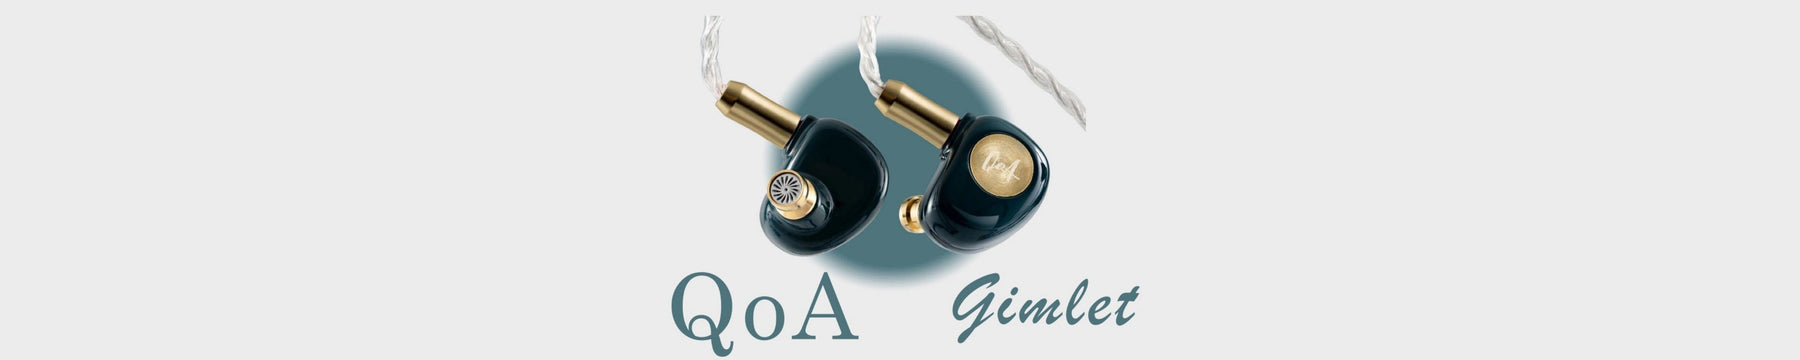 Queen of Audio Gimlet Brand New Single Dynamic Driver IEMs with 10mm LCP Composite Diaphragm